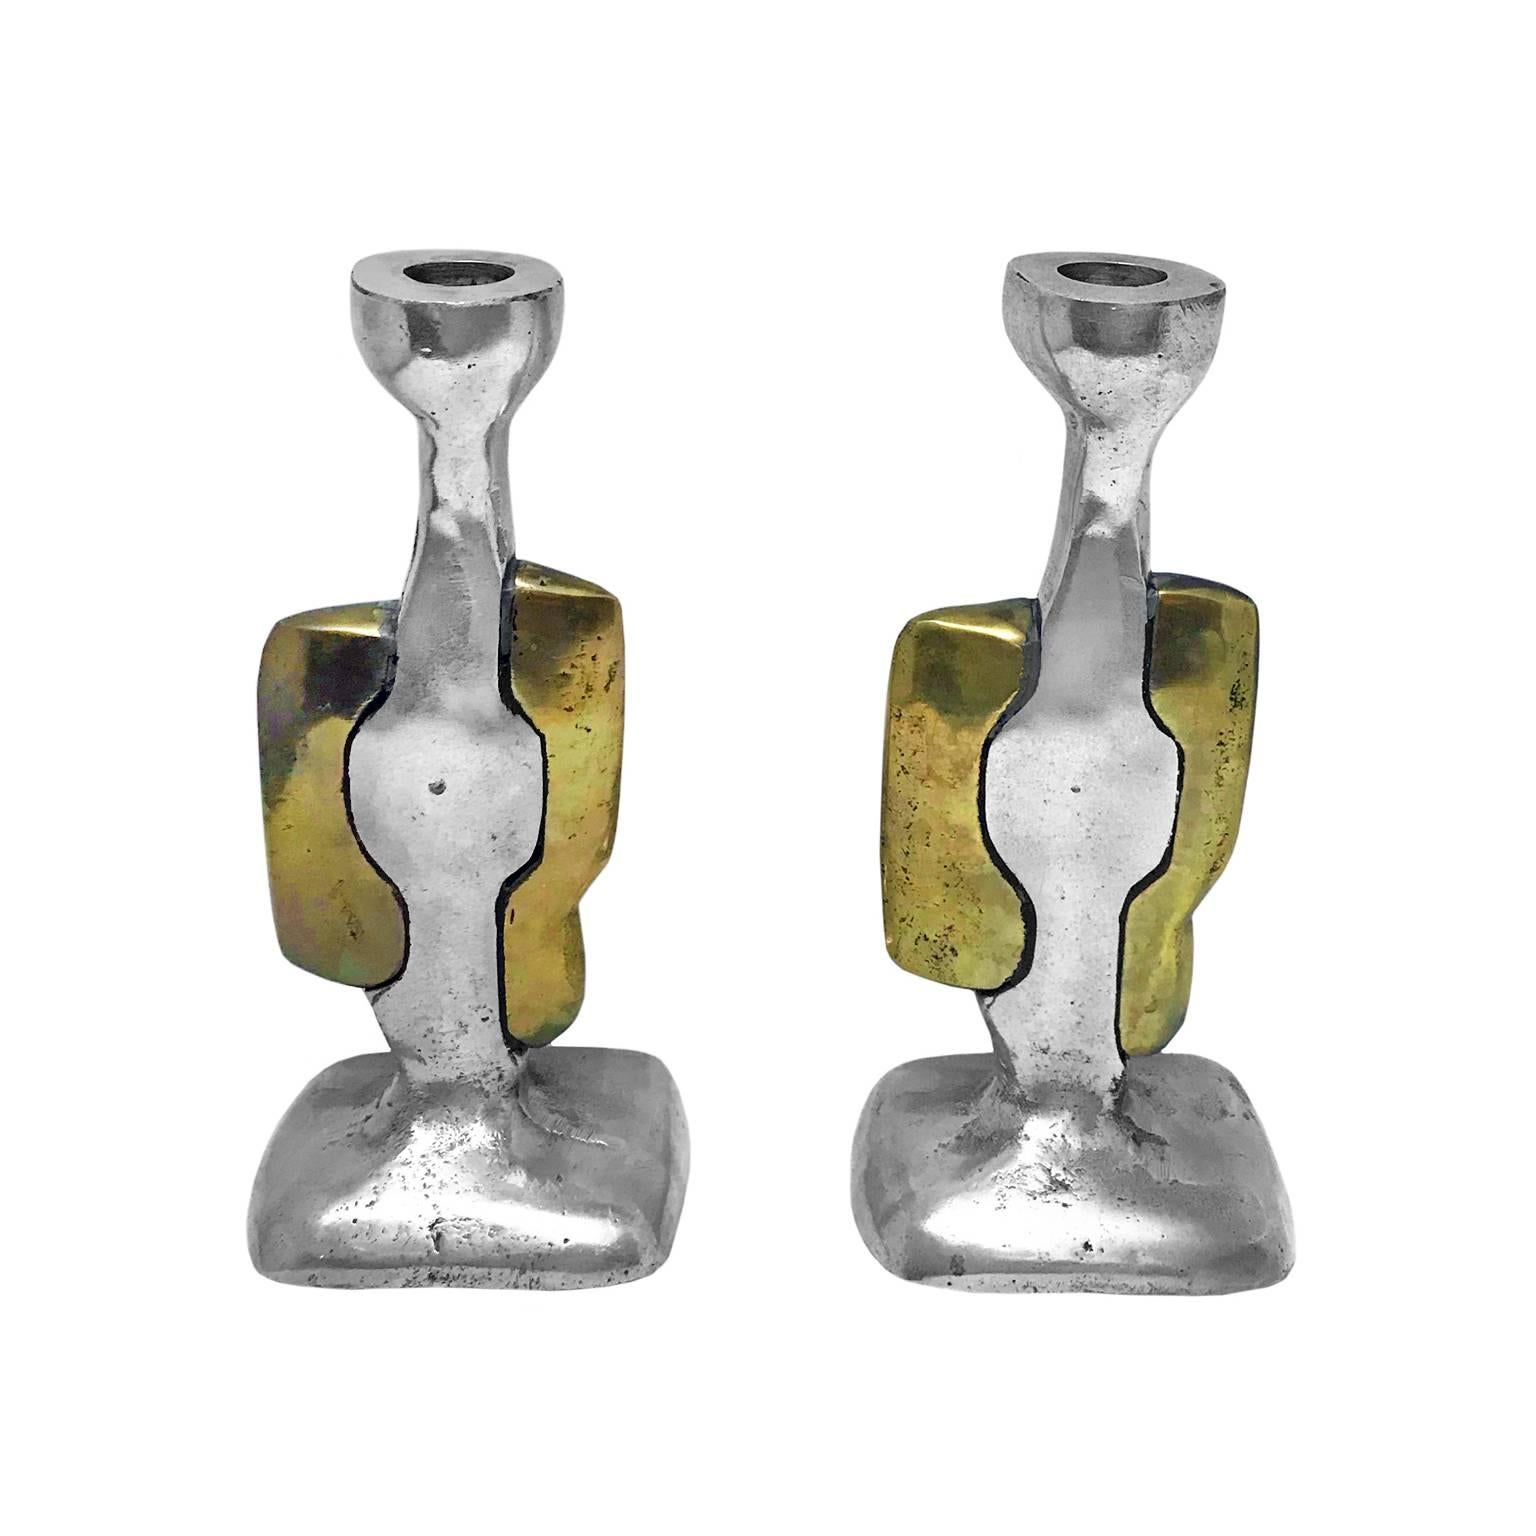 Vintage brass and aluminium candleholder by David Marshall, Spain, 1970s.

Pair available, priced individually.